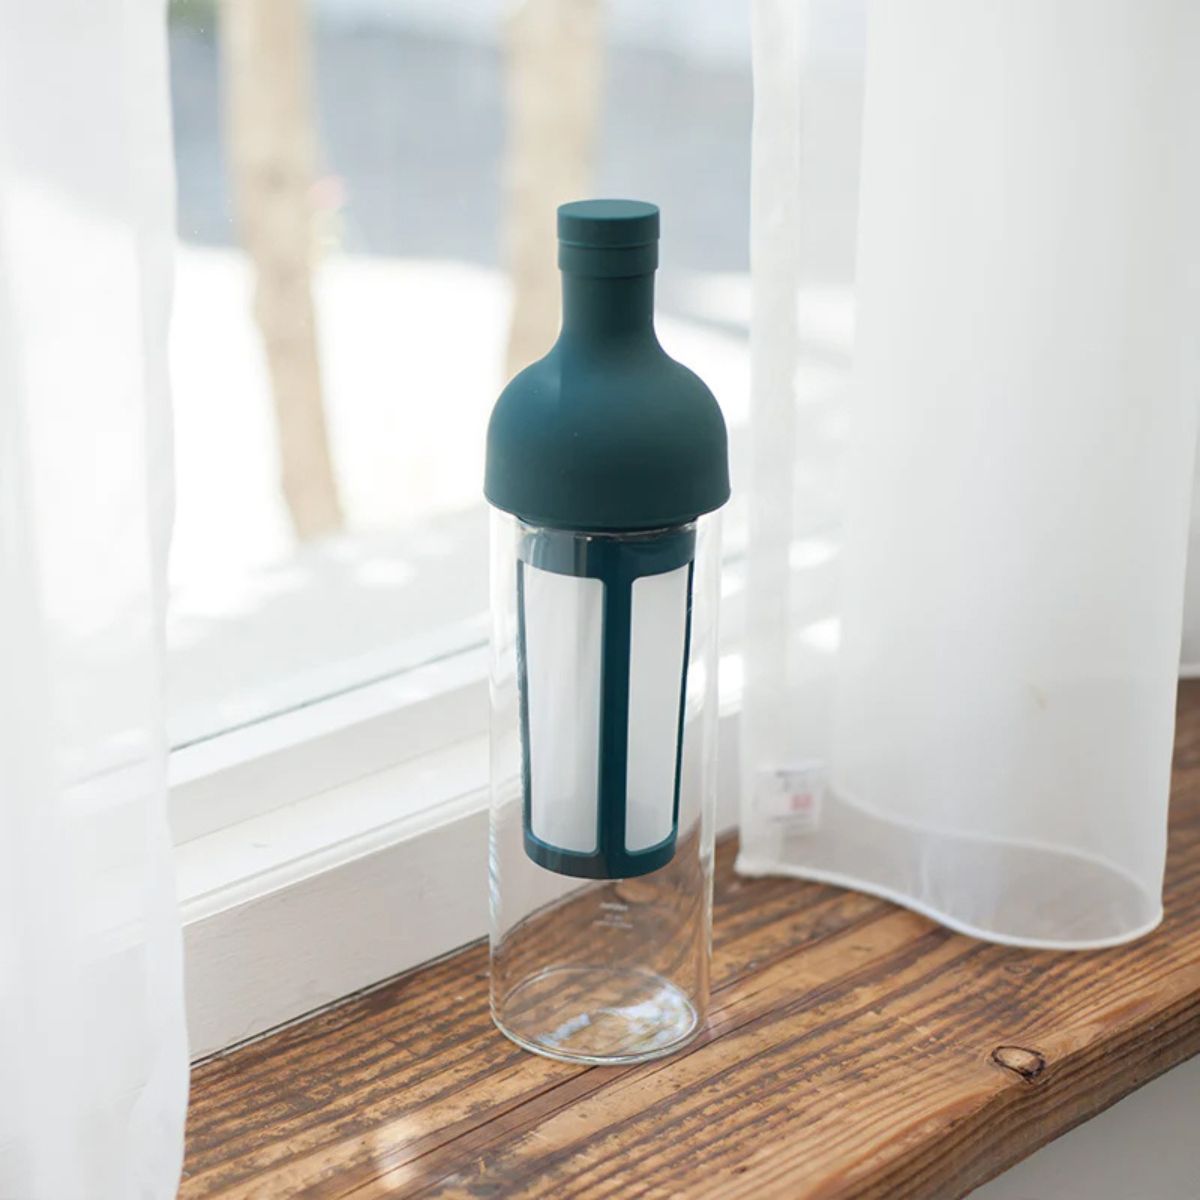 Hario bottle with filter for cold coffee ice coffee - Various colors